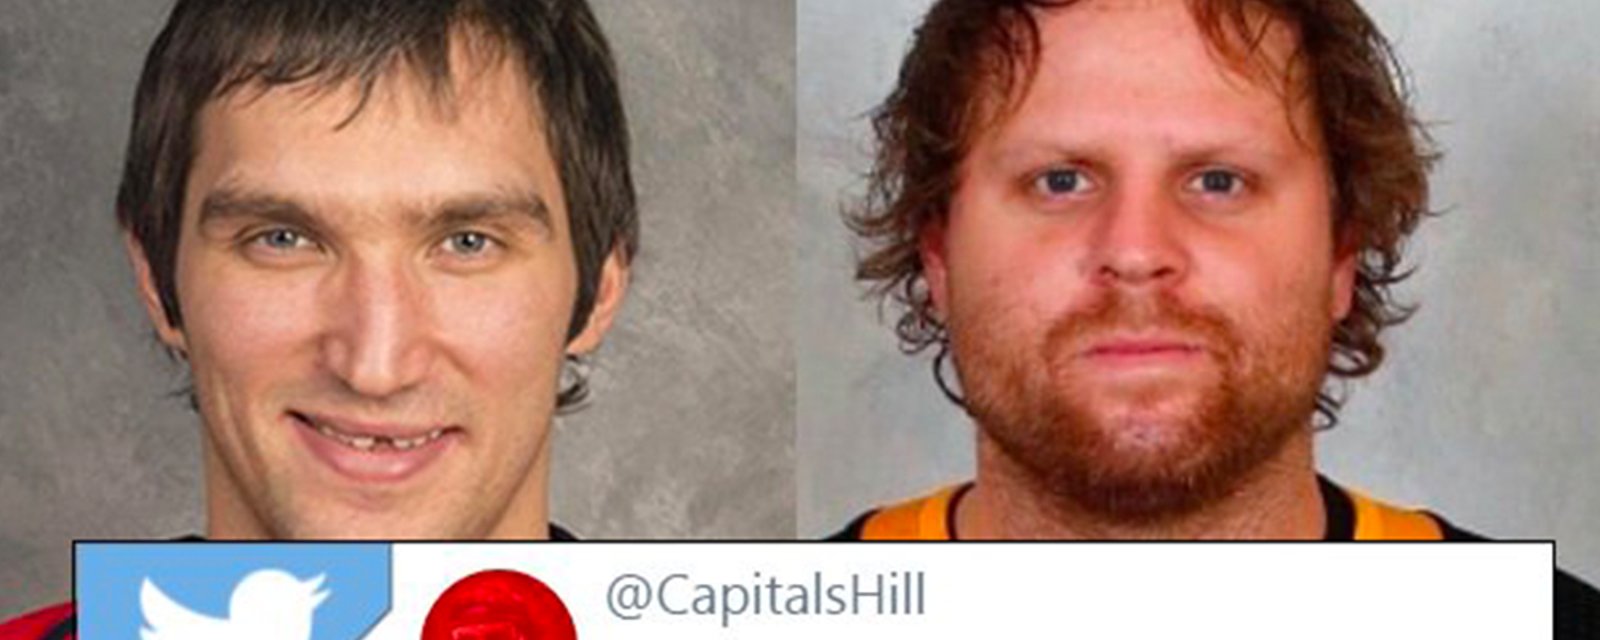 This Ovechkin/Kessel face mashup will haunt your dreams.